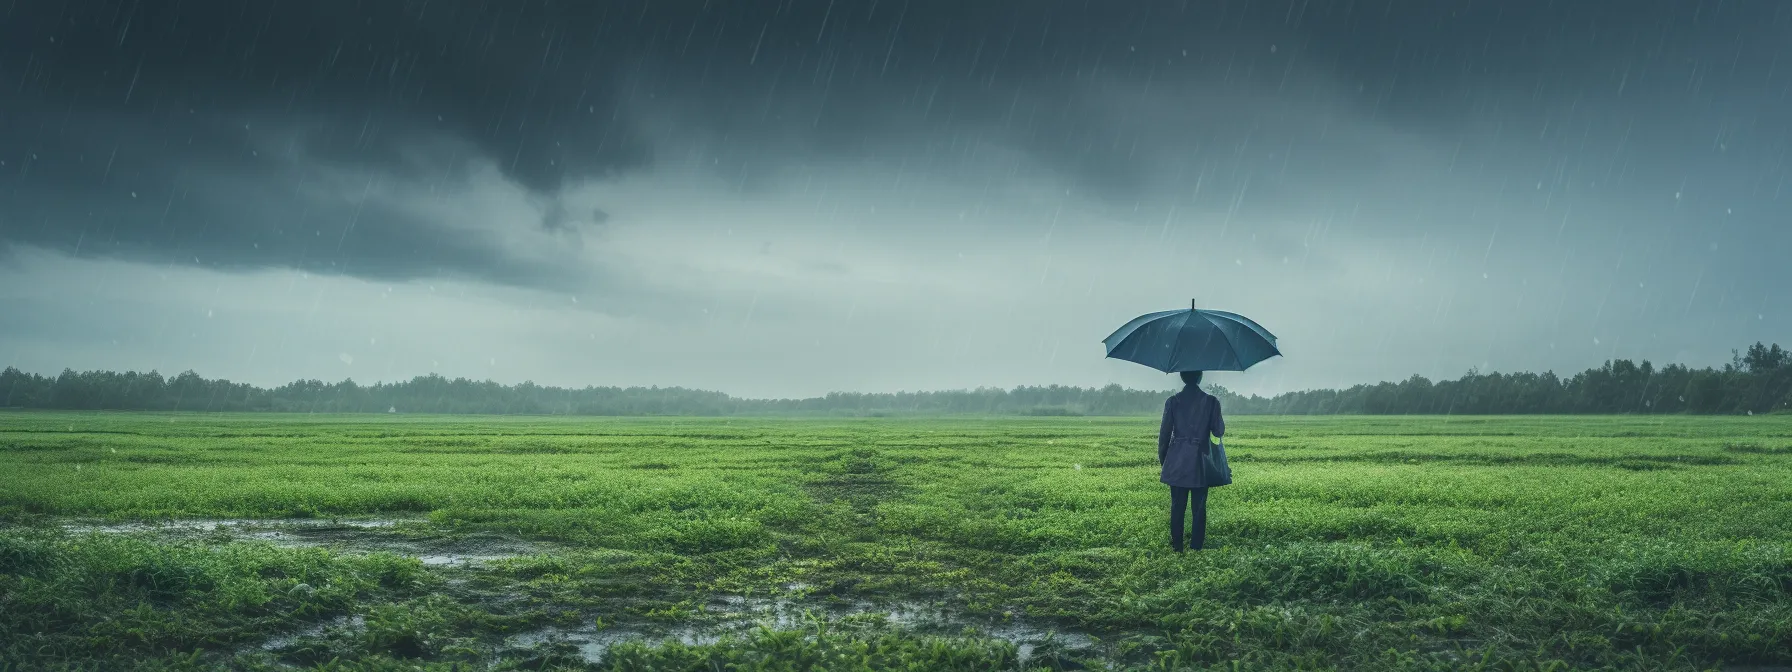 A Person Holding An Umbrella Under A Rainstorm, Surrounded By A Field, Symbolizing The Continuous Improvement And Evolution Of Branding Strategy.